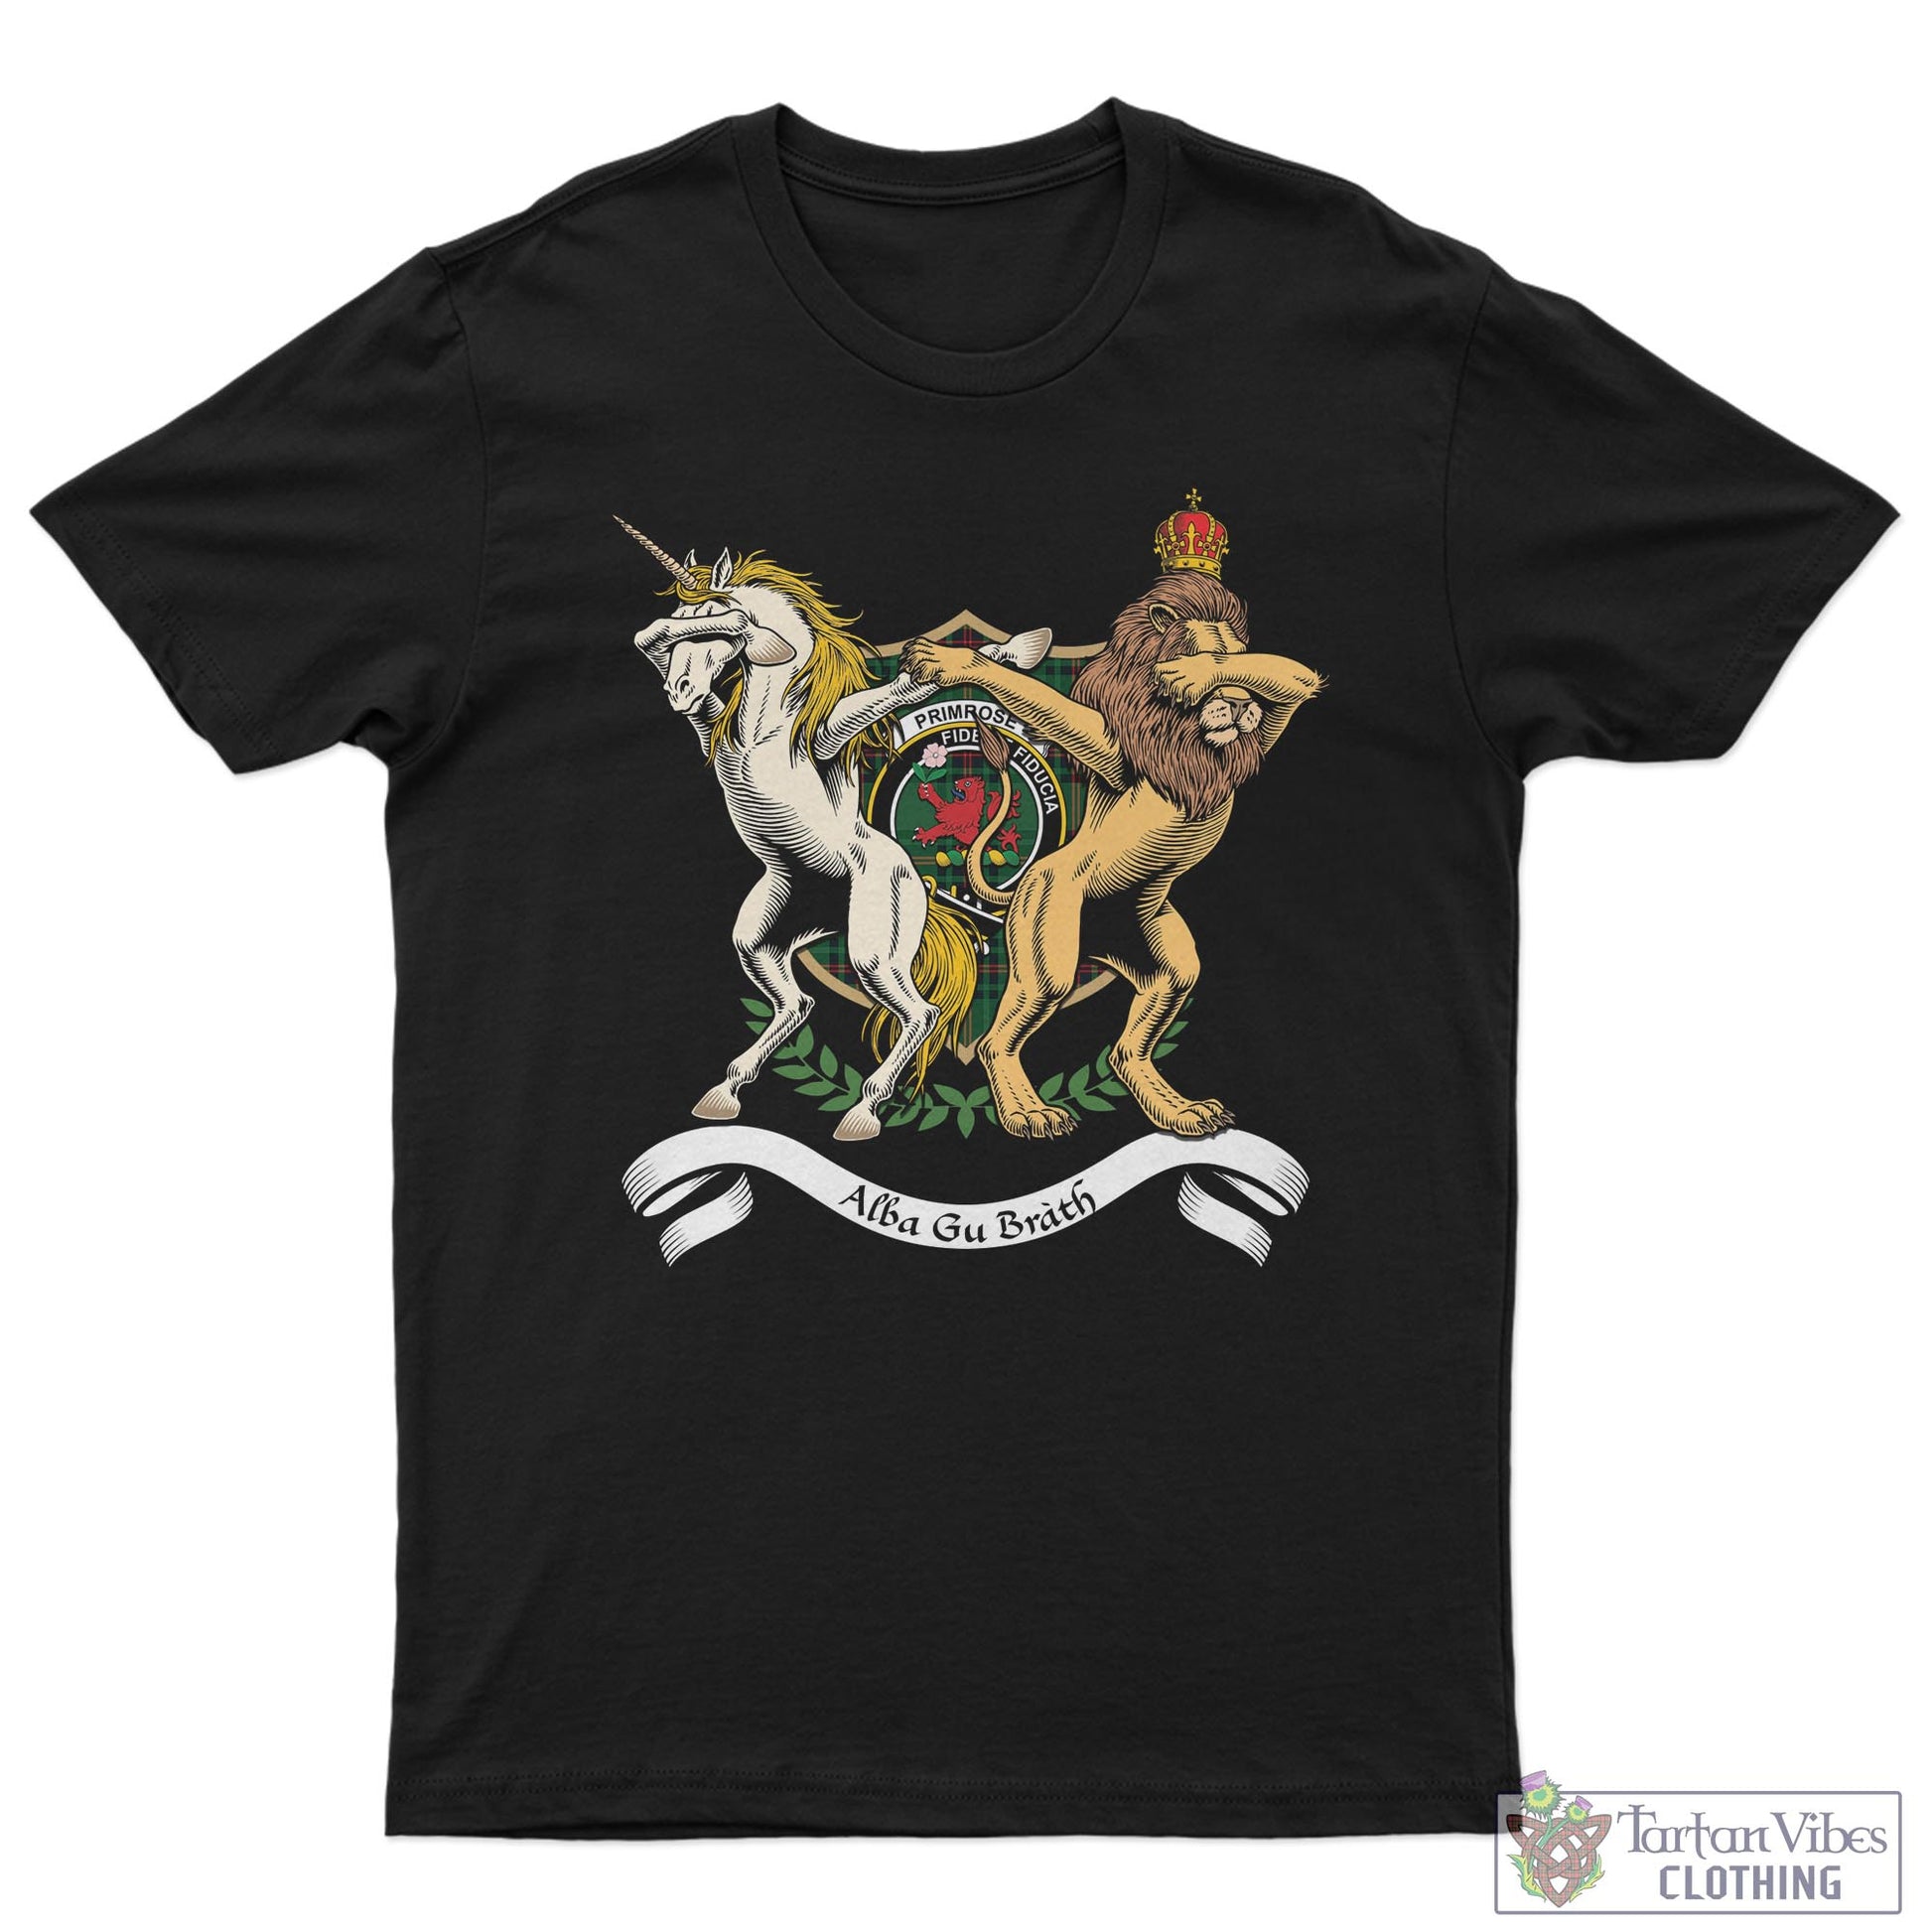 Tartan Vibes Clothing Primrose Family Crest Cotton Men's T-Shirt with Scotland Royal Coat Of Arm Funny Style